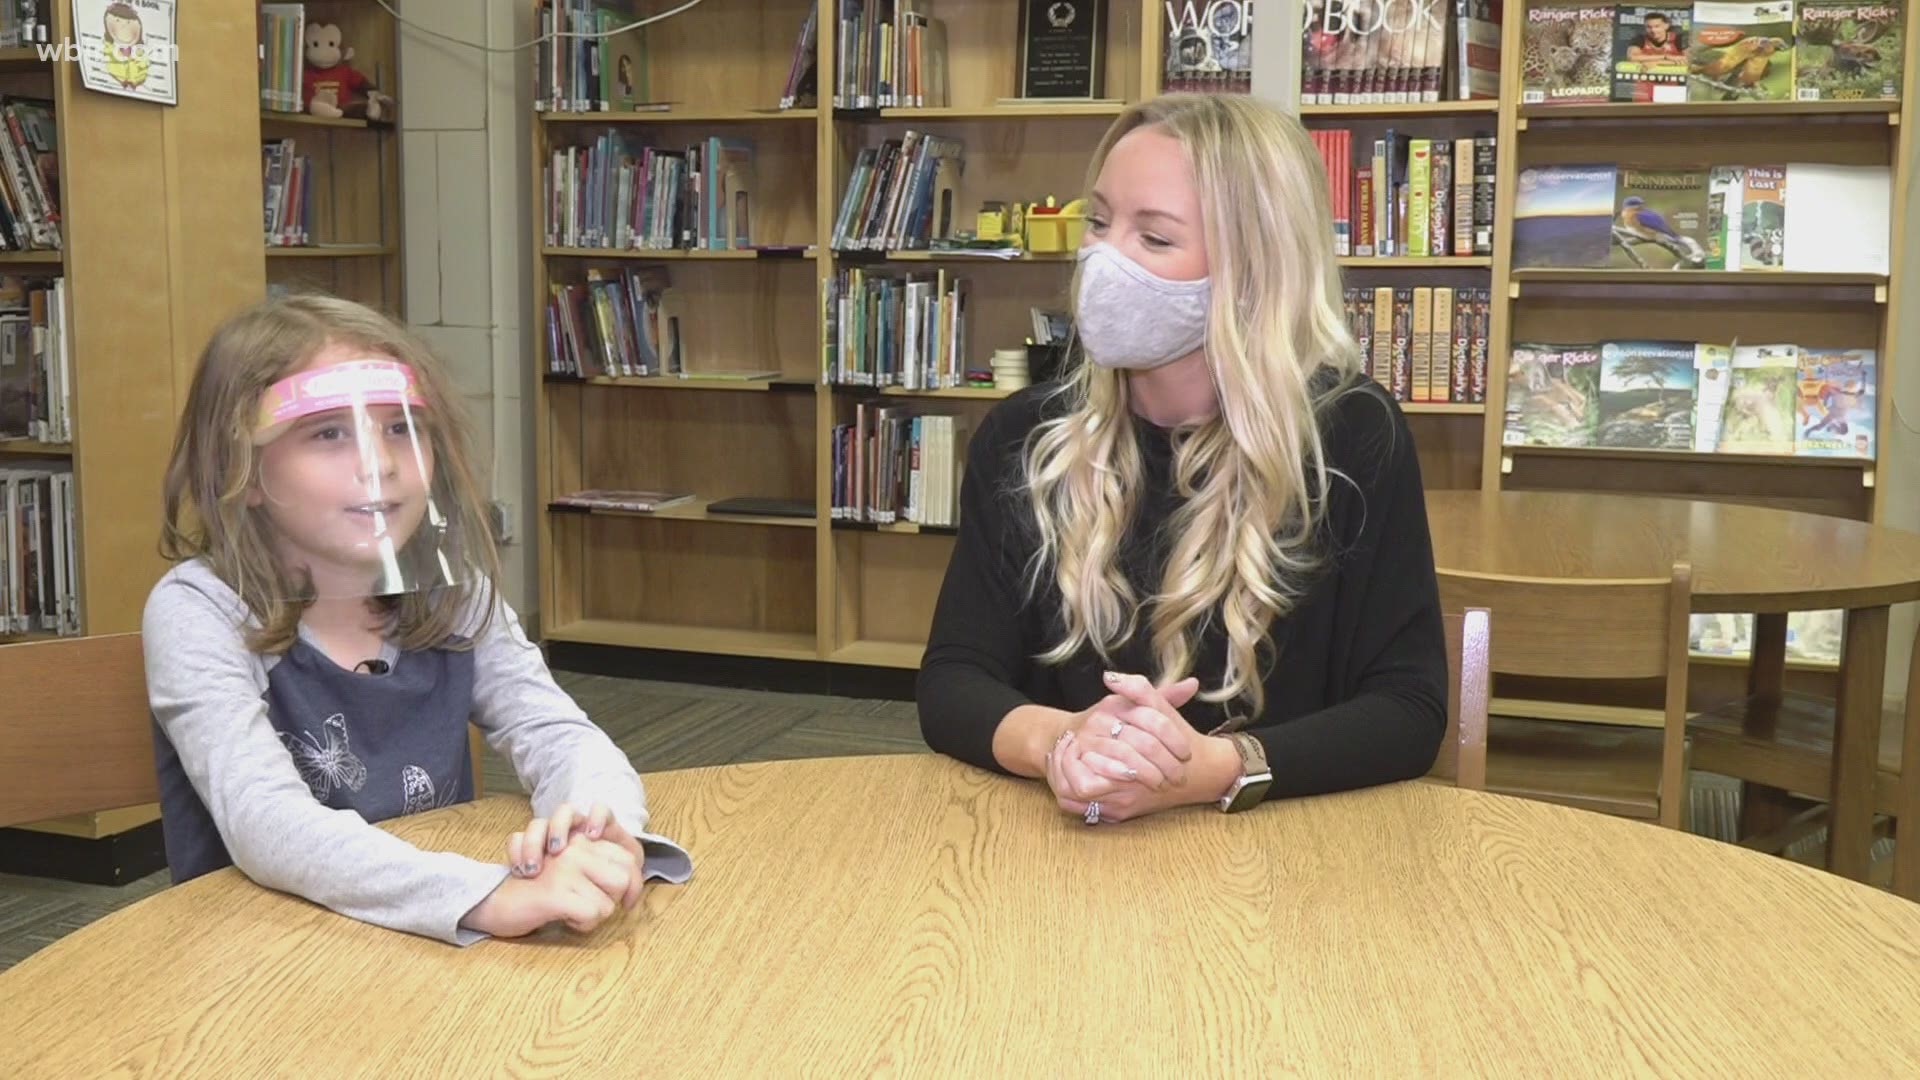 In this edition of Live A Little, we meet Isabella and Lindsey.